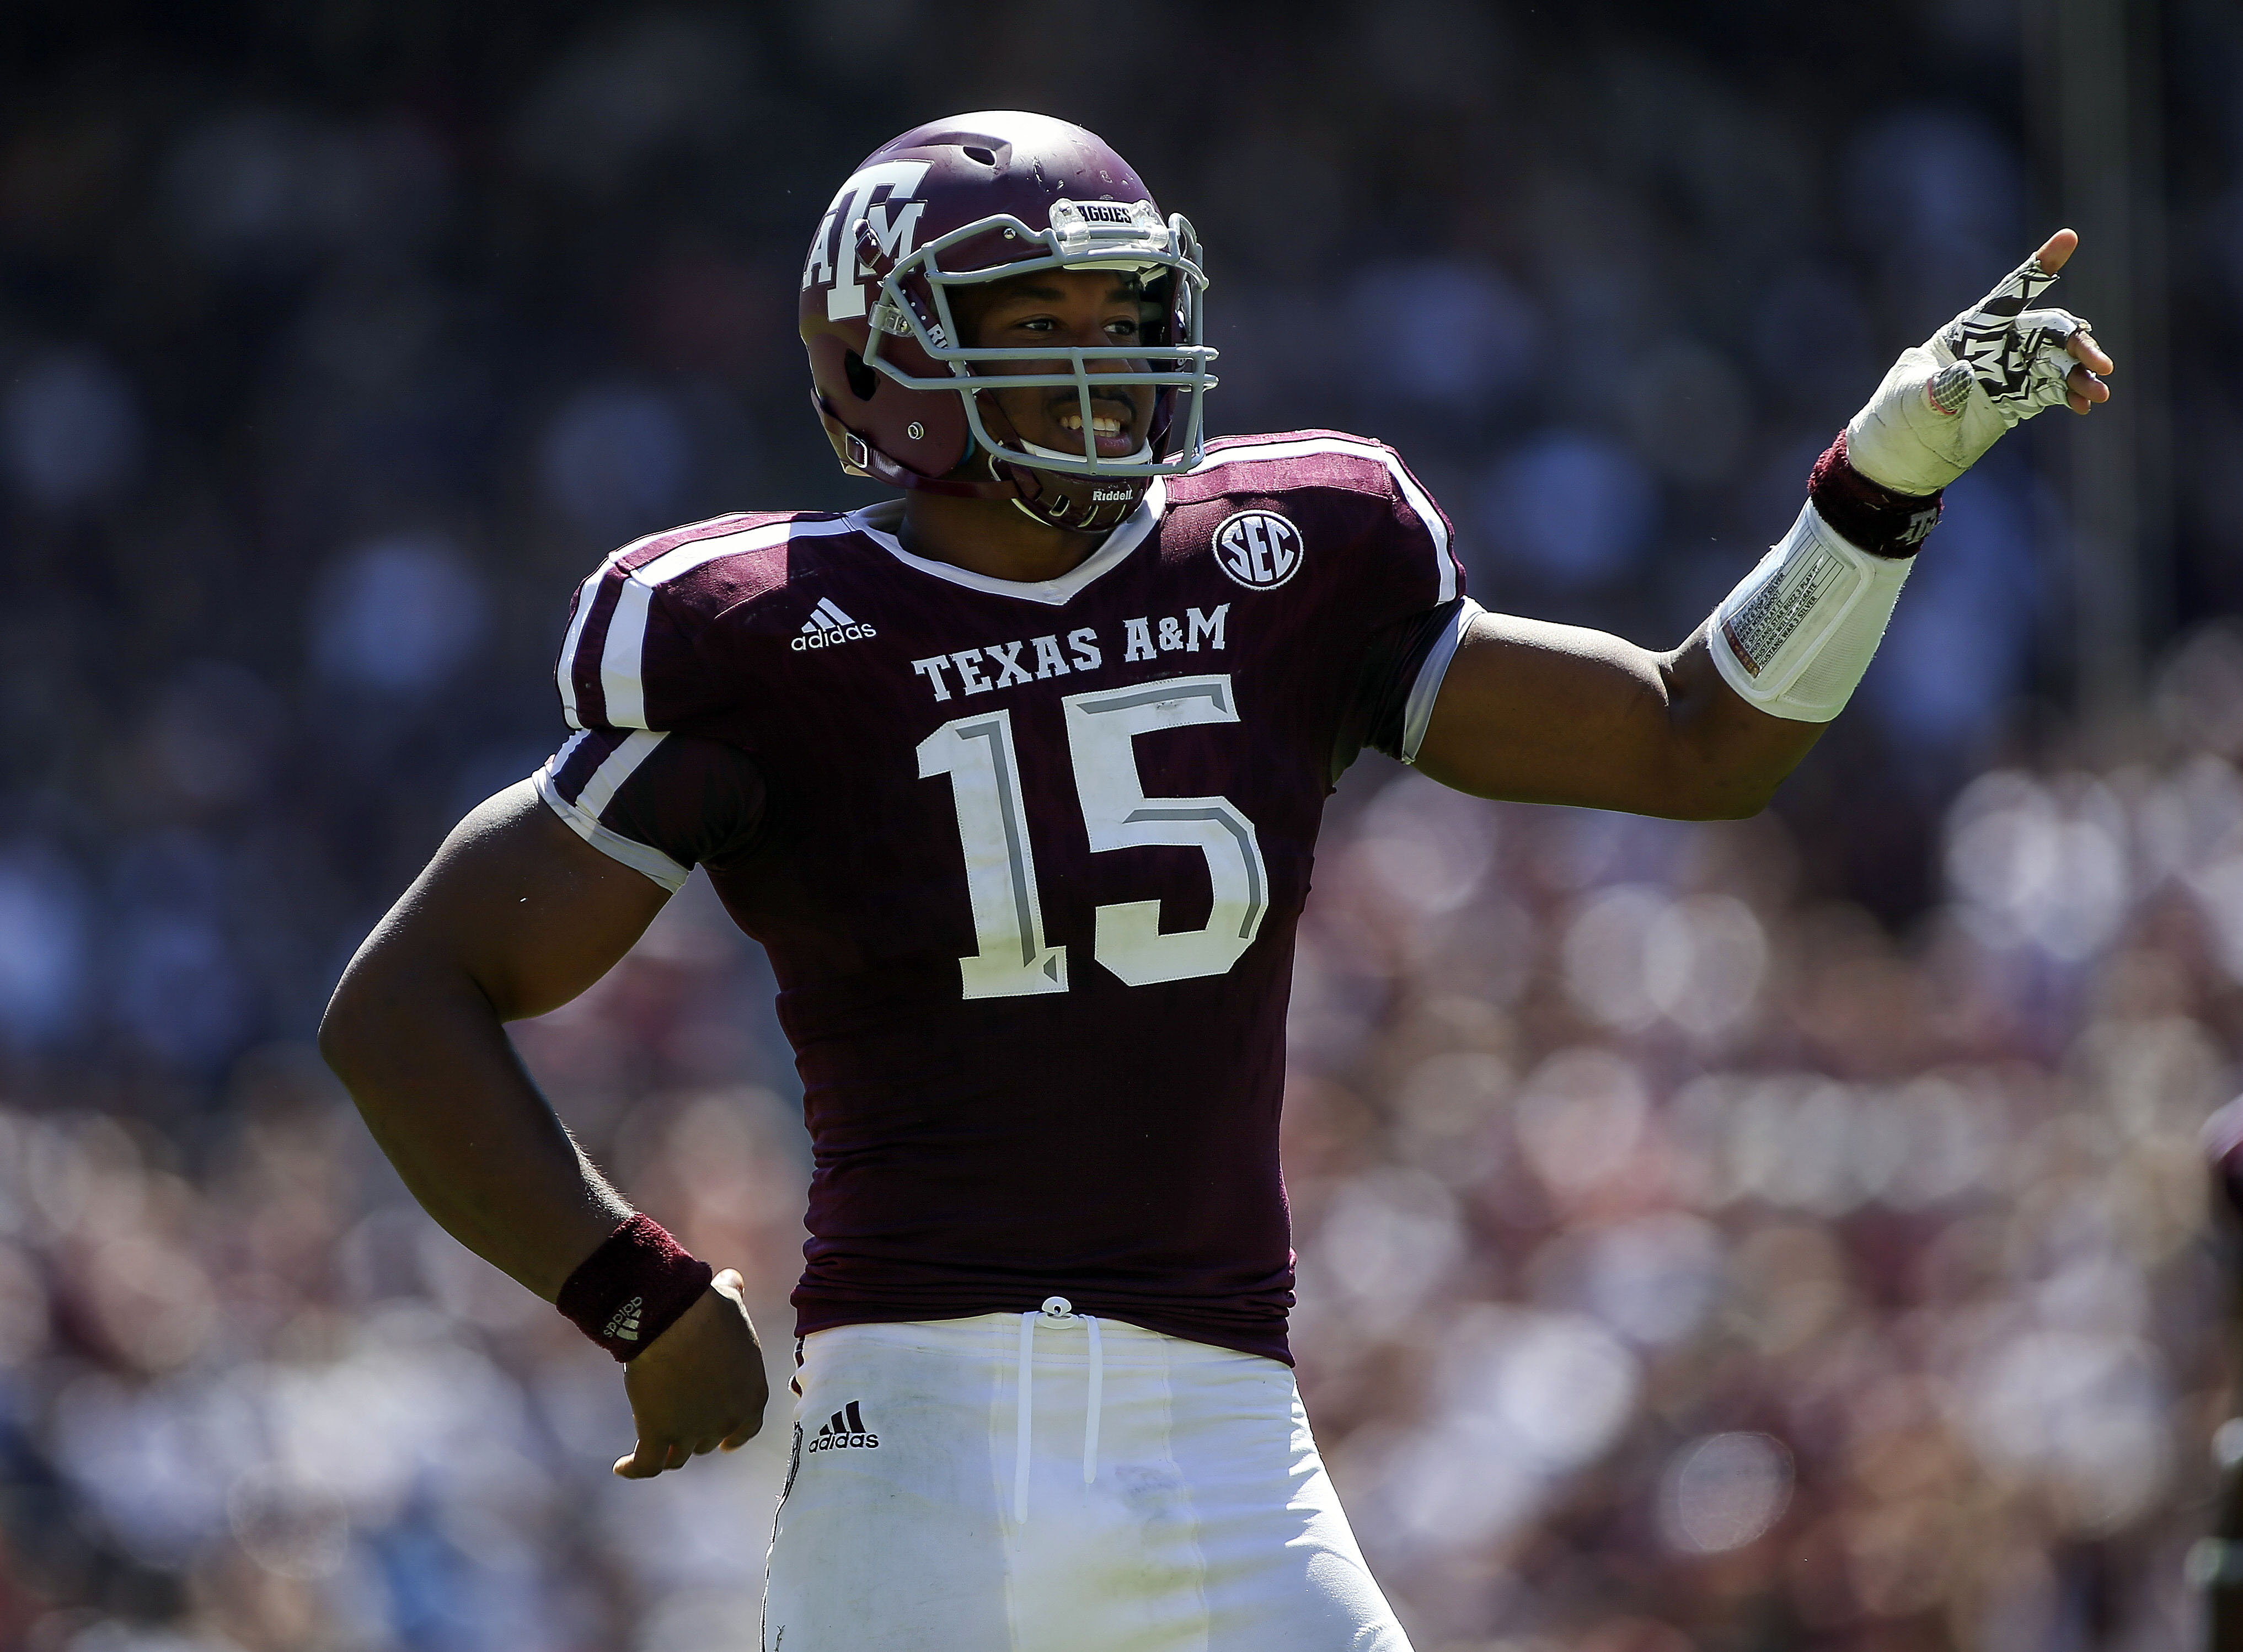 Texas A&M Football Where will the Aggies be Selected in the NFL Draft